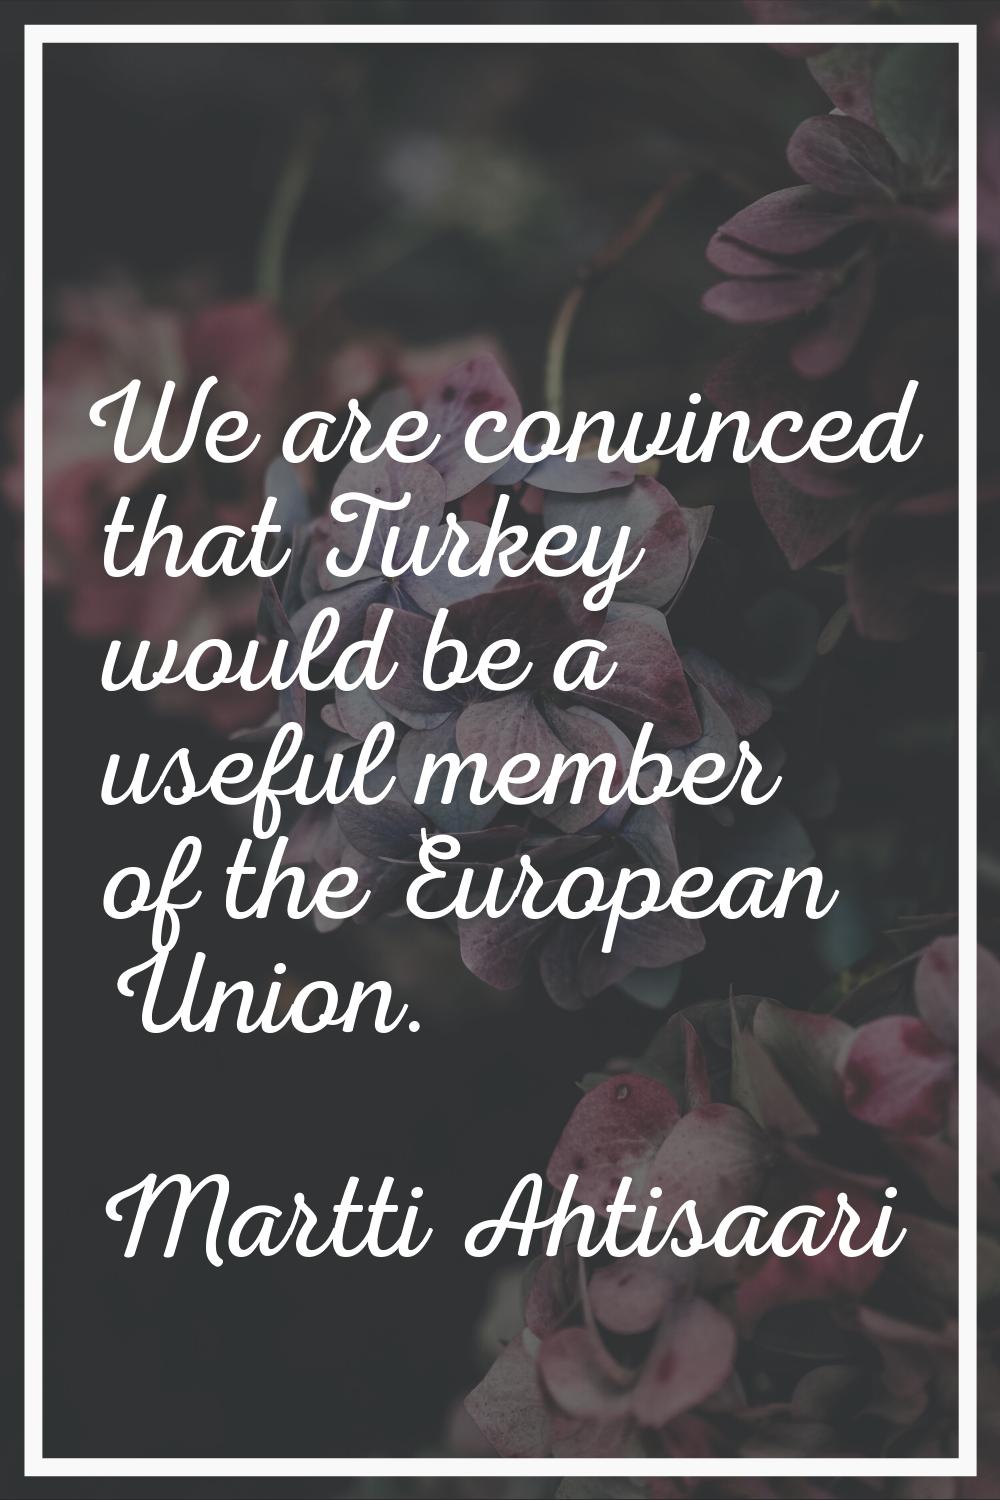 We are convinced that Turkey would be a useful member of the European Union.